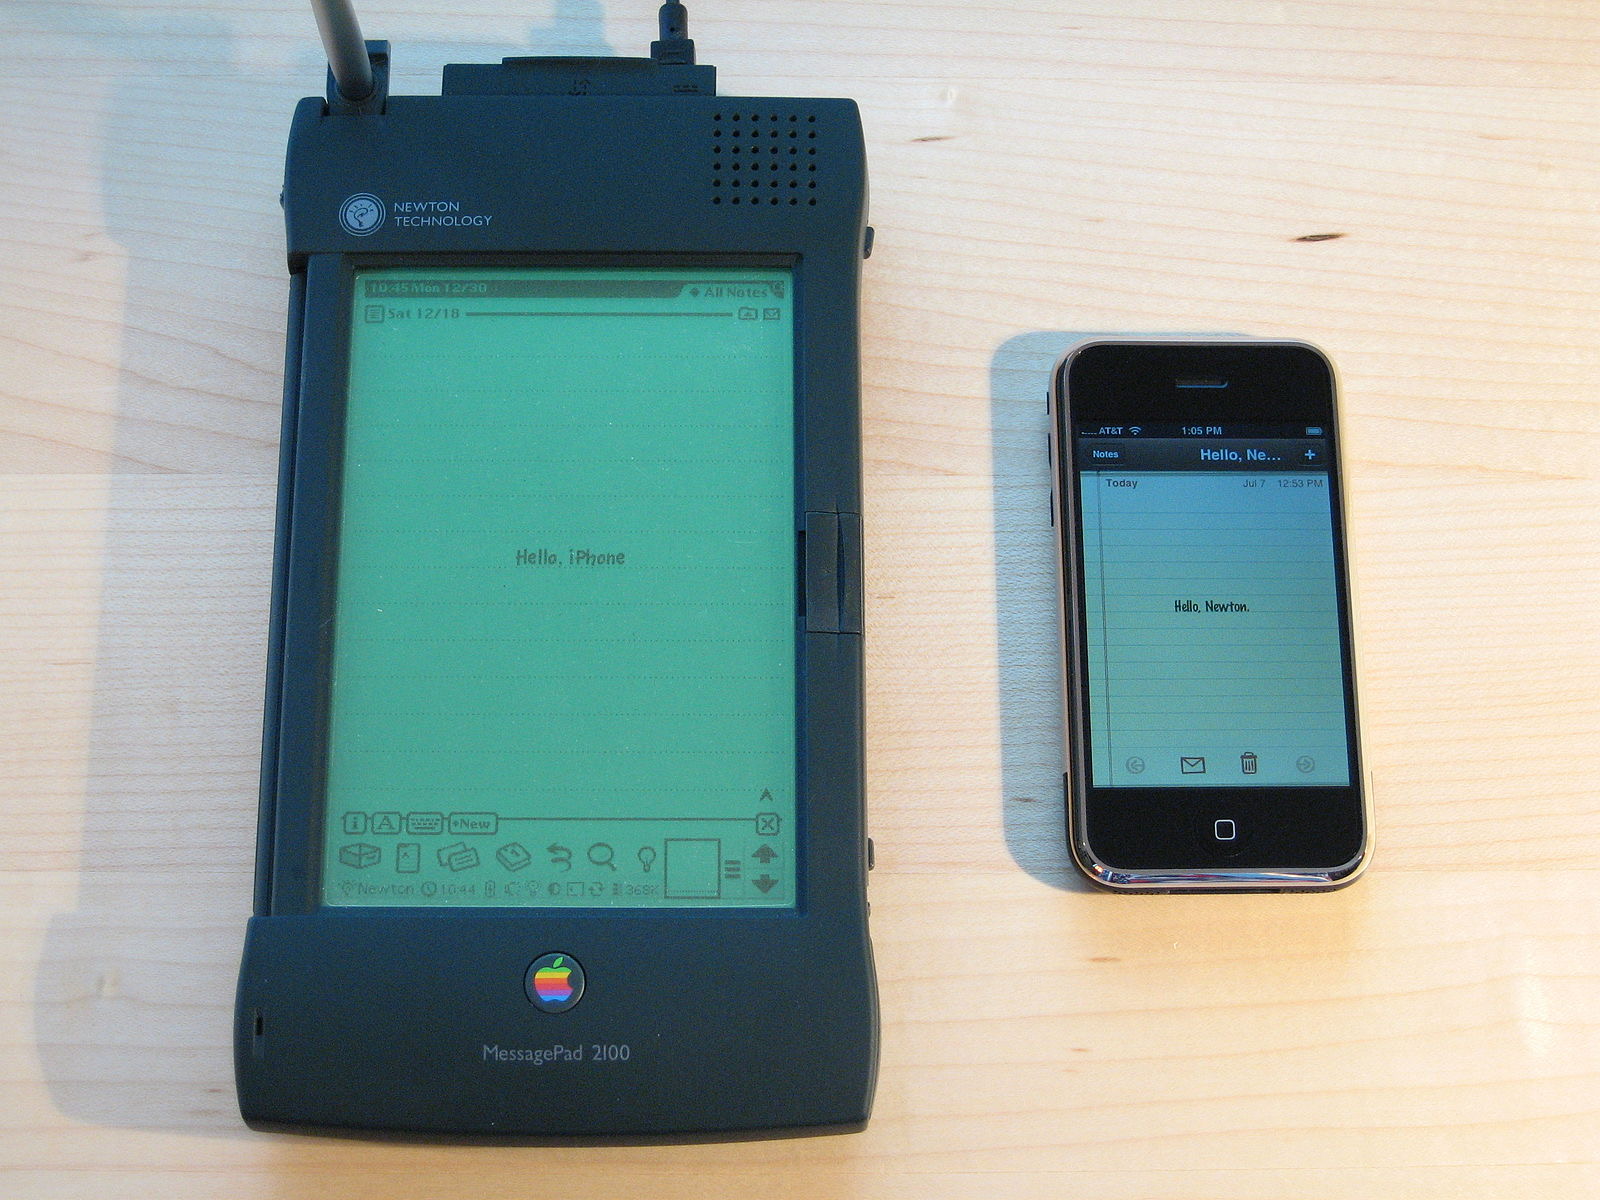 Remembering Apple's Newton, 30 years on | Ars Technica